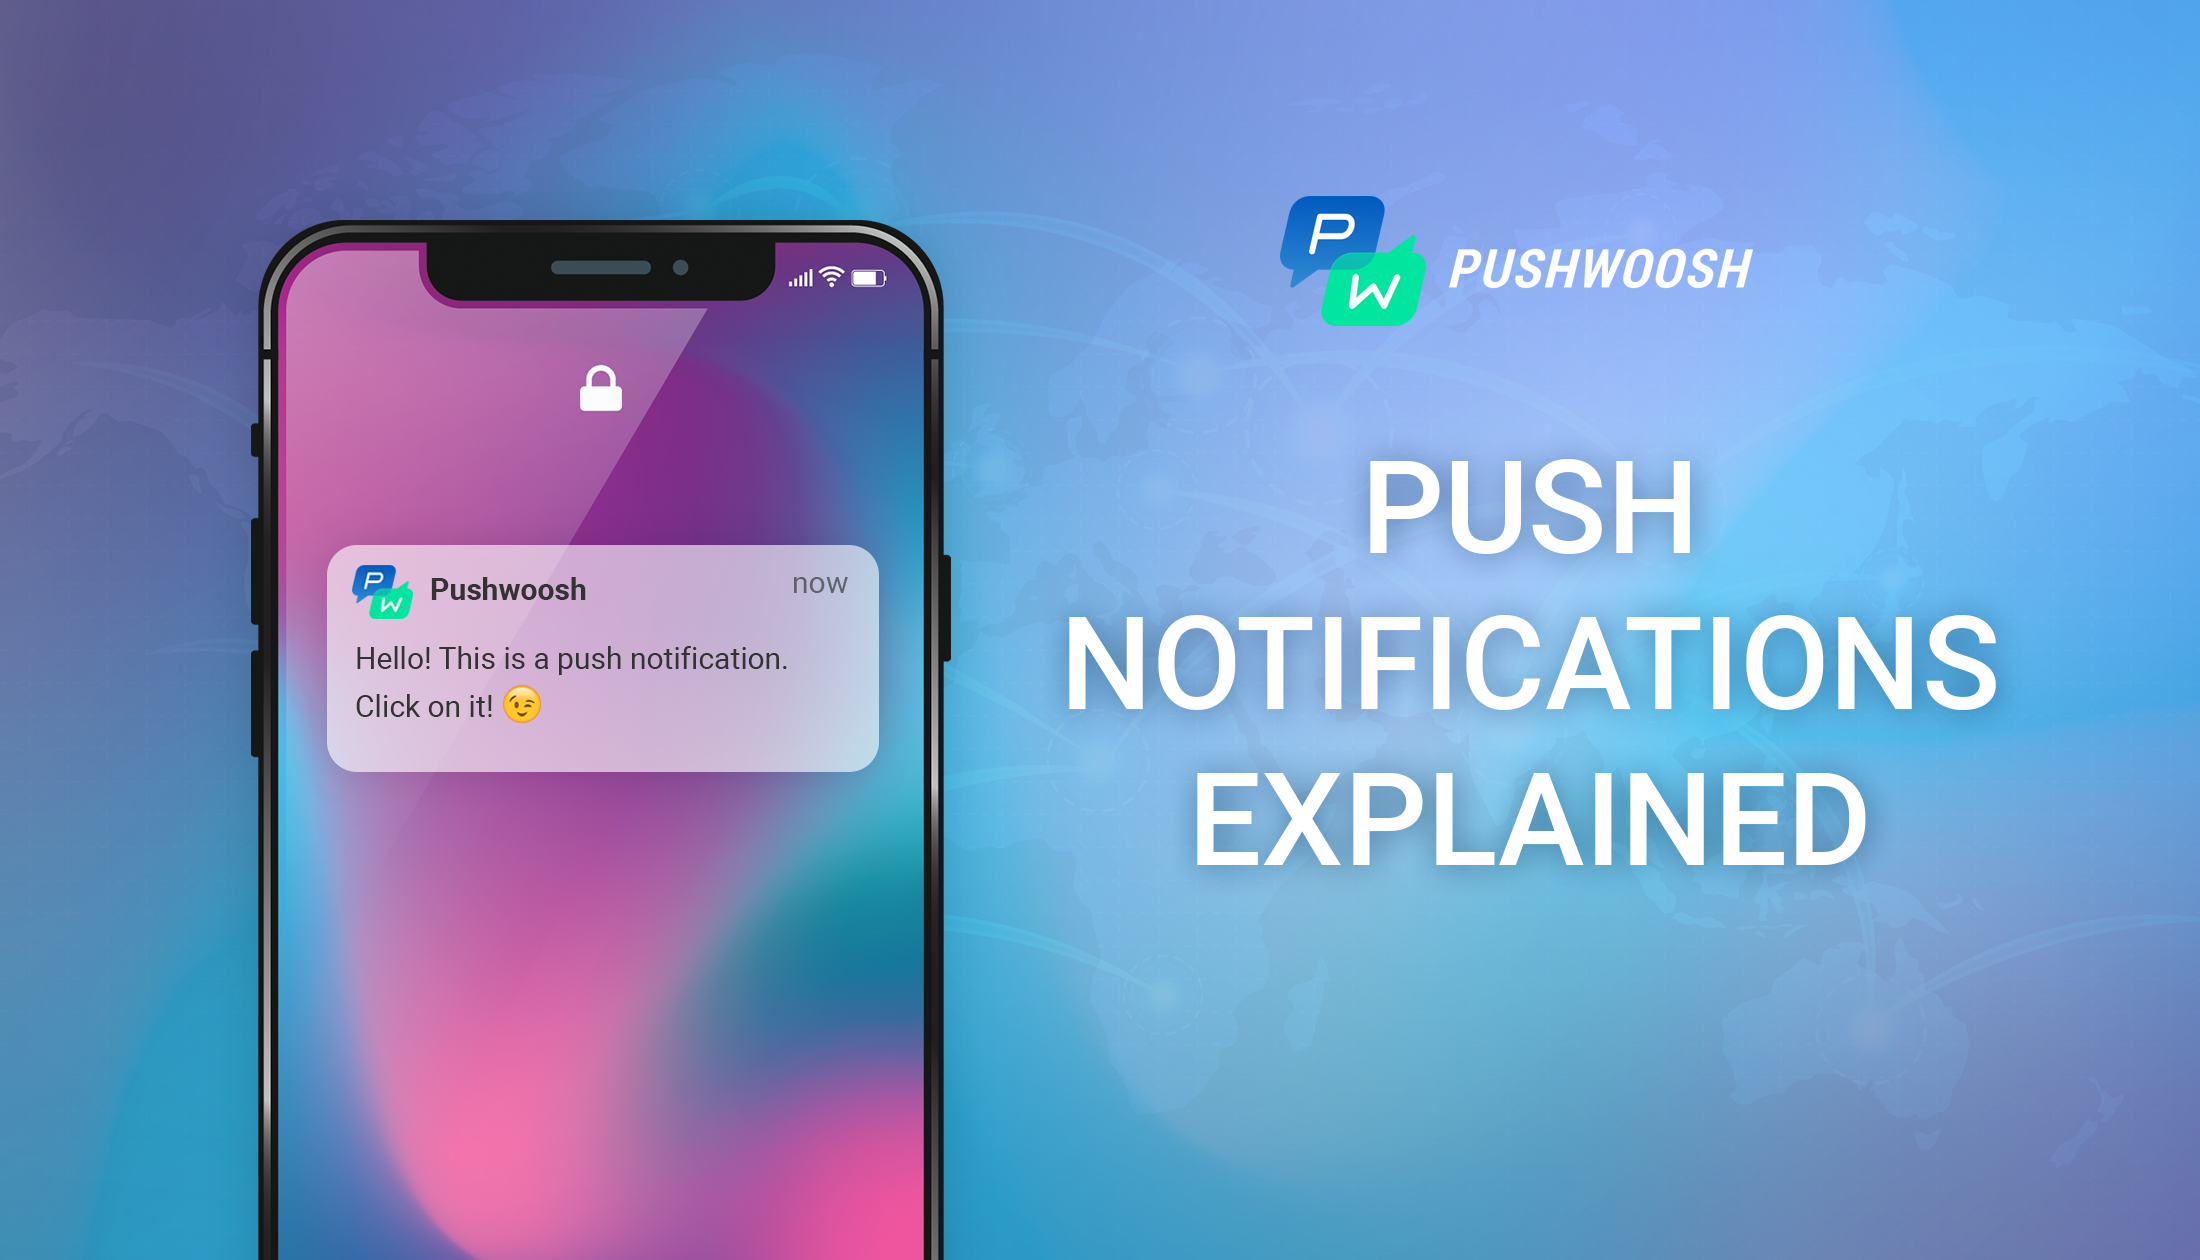 What Are Push Notifications?